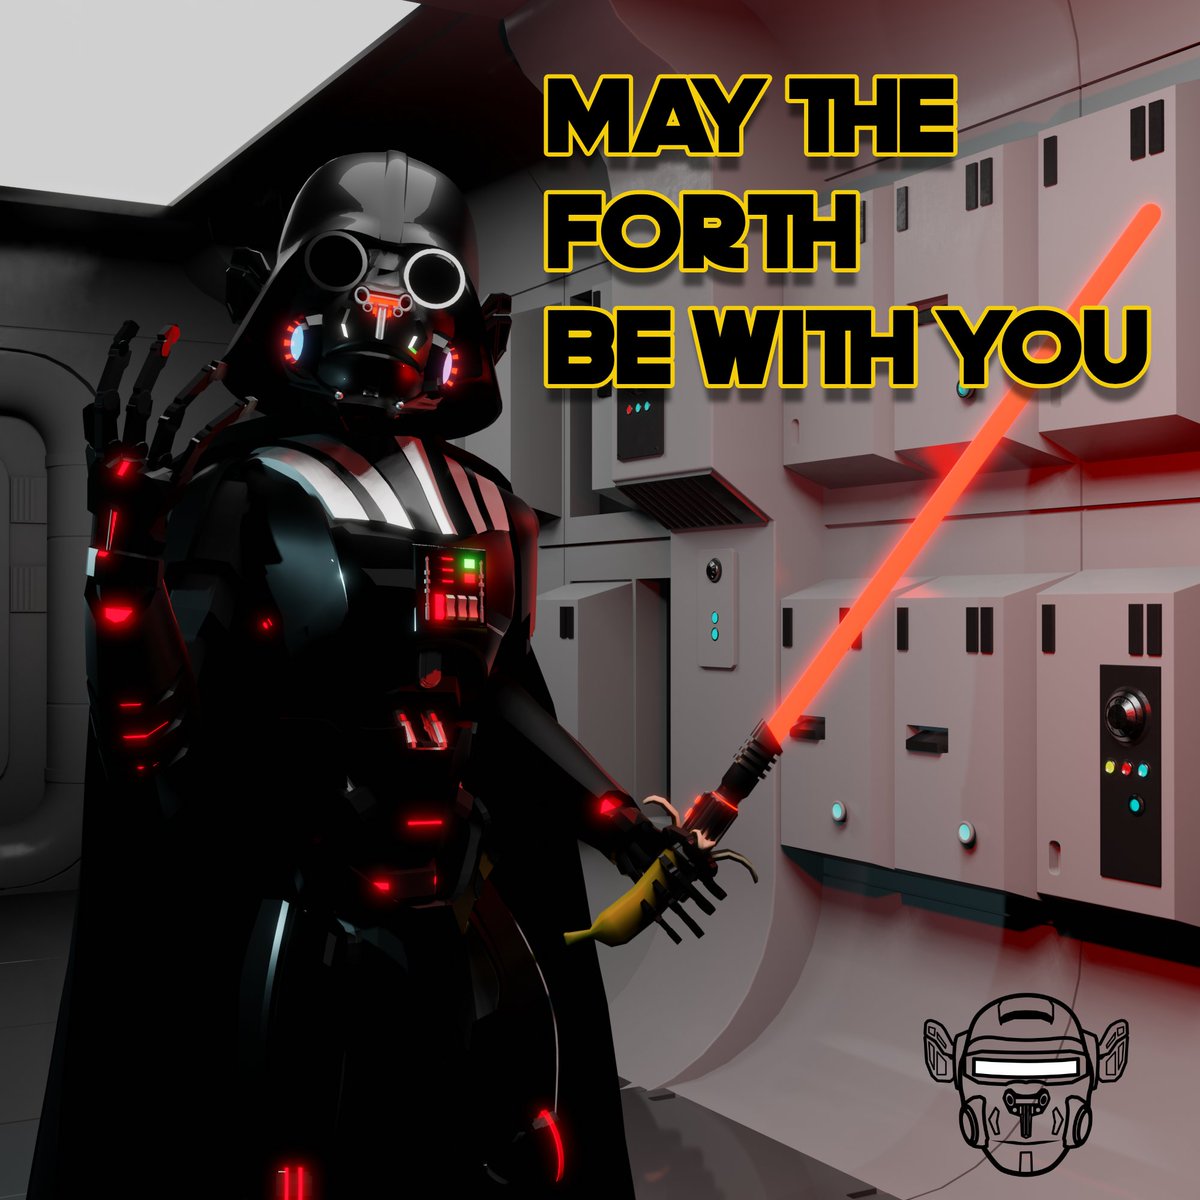 MAY THE FORTH BE WITH YOU!!
Better late than never! I'm dropping a very special #MetaBotApe for this May the Forth on @Nifty_Island in 30 min!
There are 21 in total but listing 20 of them! Comes with a Banana saber! #NFTGaming #NiftyGang #NFTCreator #NFTCommunity #Blenderholic